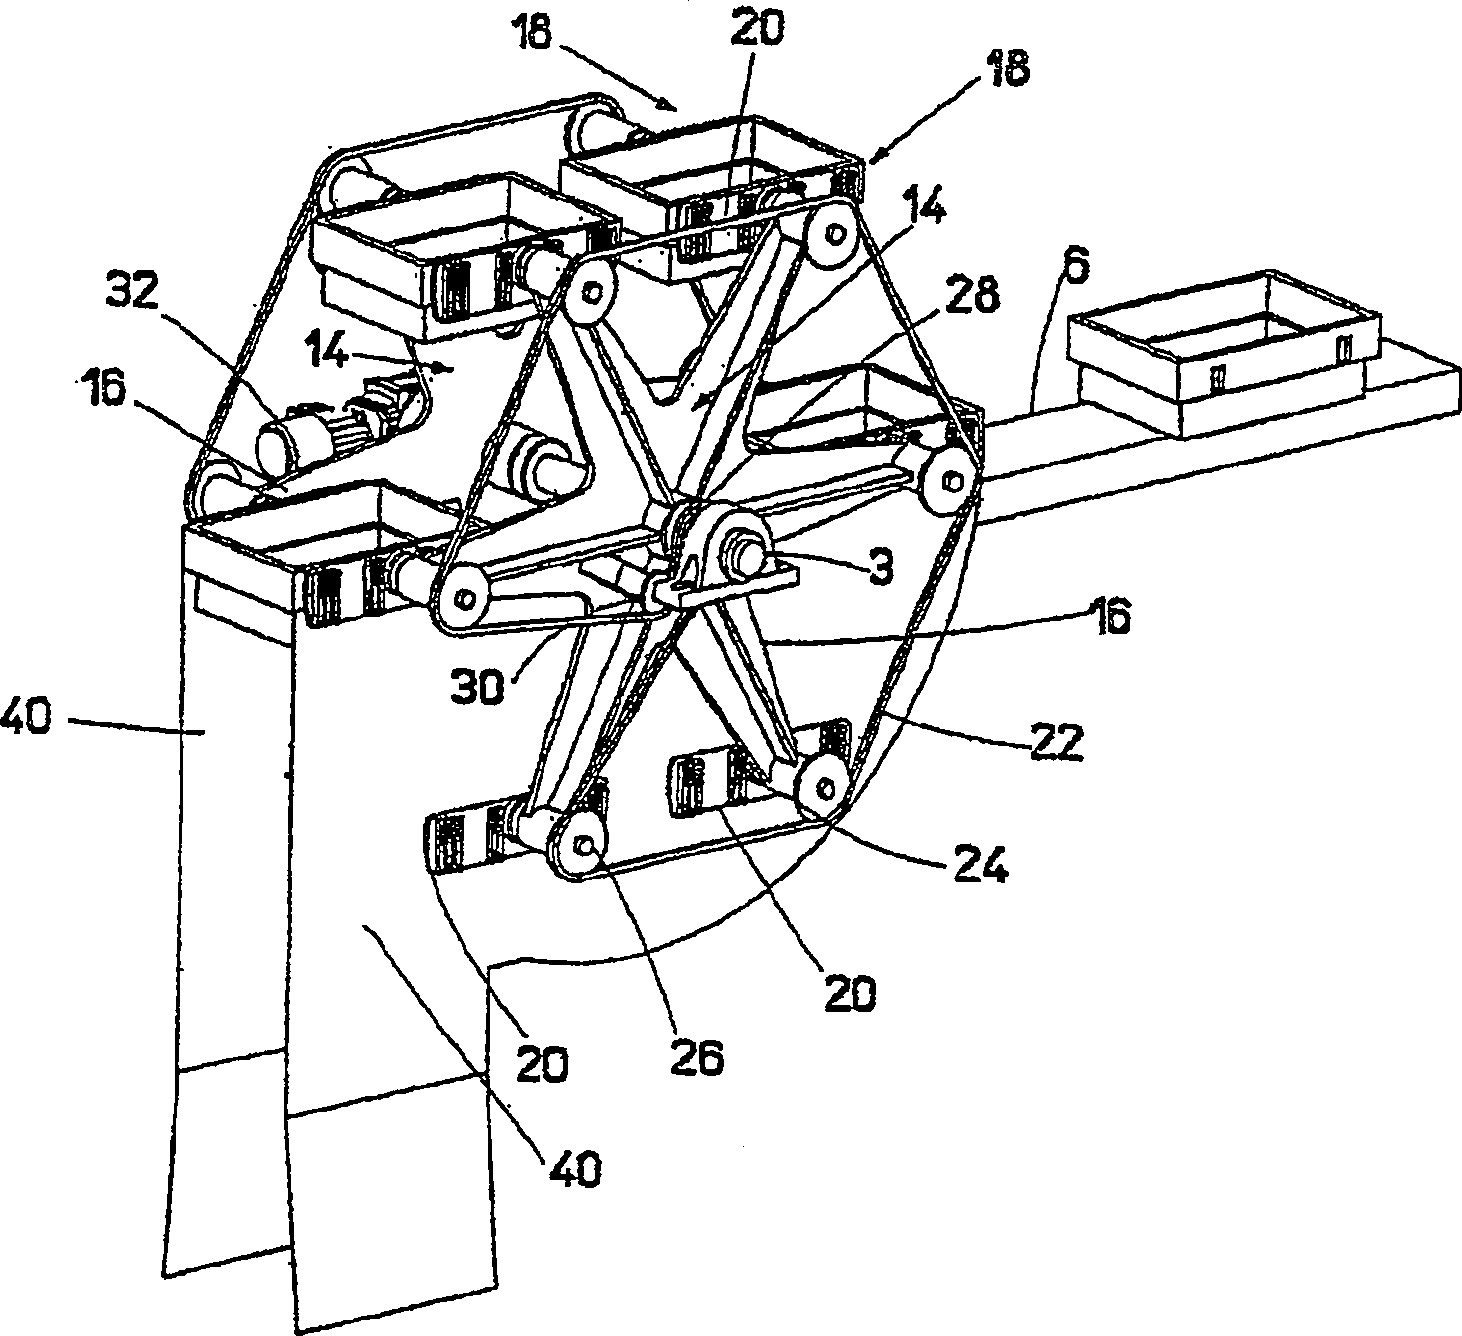 Device for stacking and unstacking objects